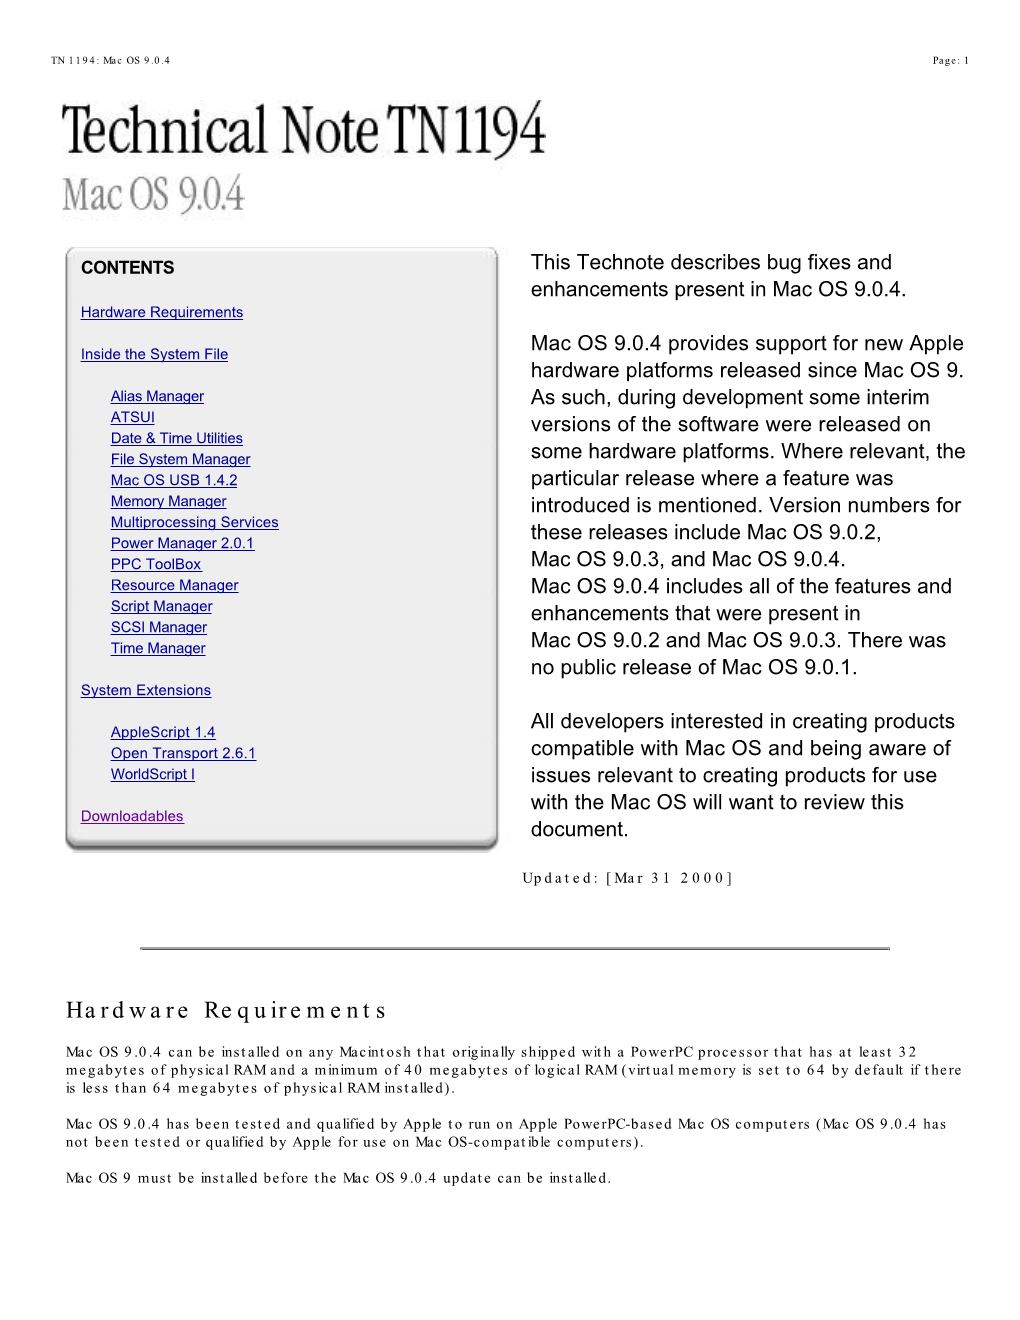 Hardware Requirements Mac OS 9.0.4 Provides Support for New Apple Inside the System File Hardware Platforms Released Since Mac OS 9